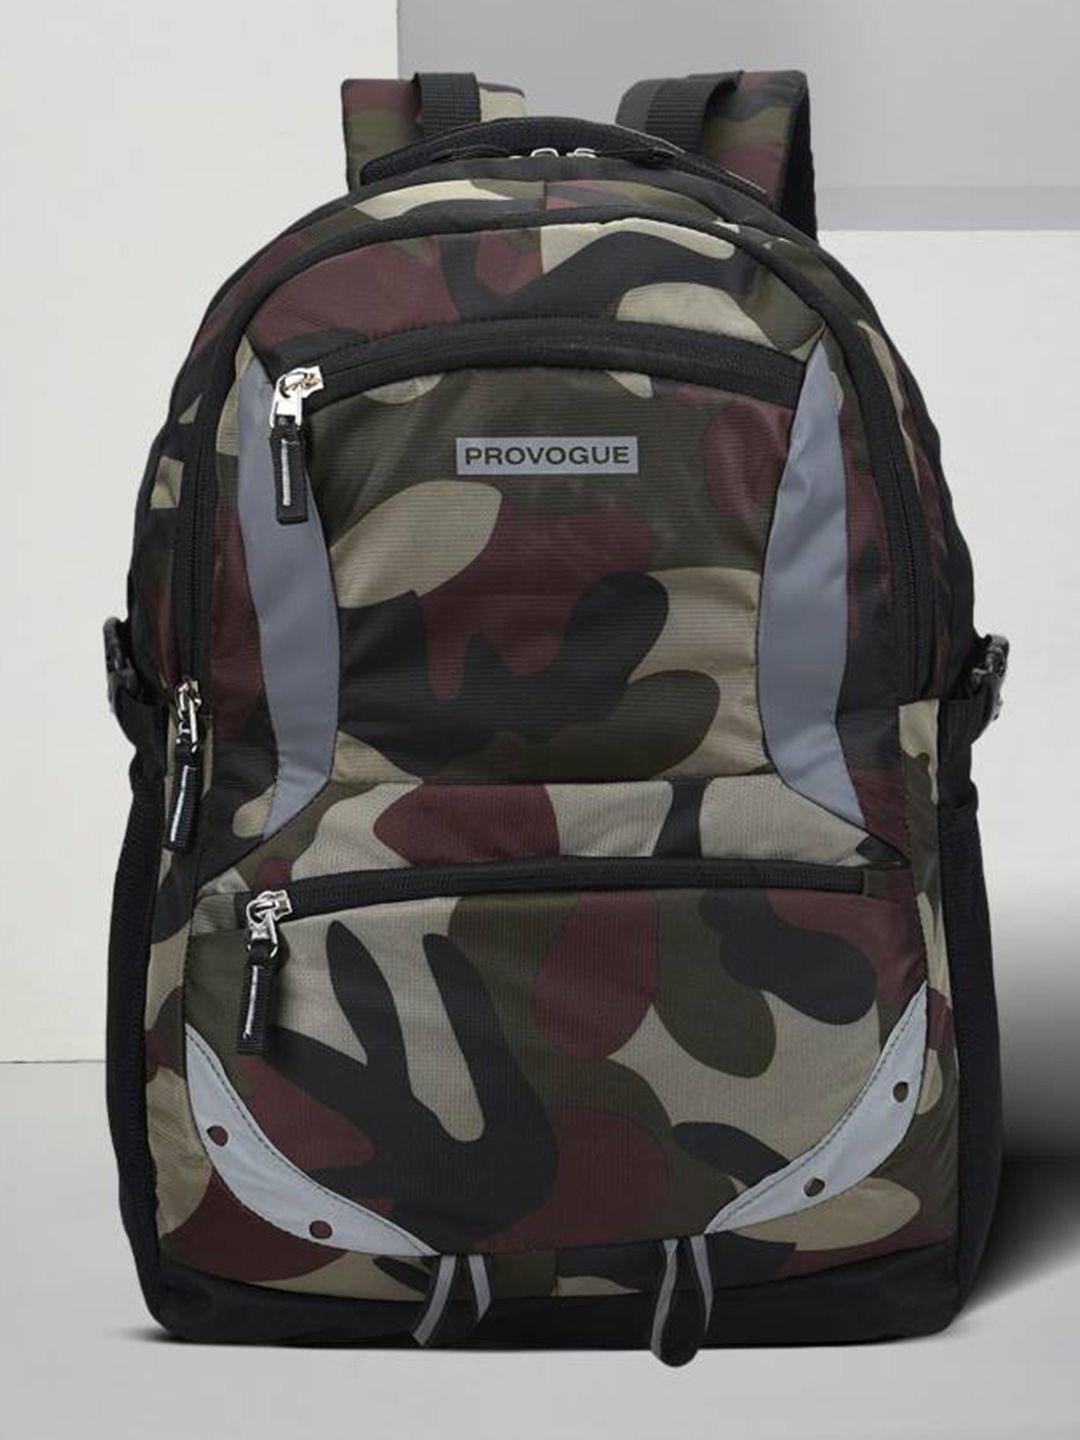 provogue unisex camouflage printed backpack with reflective strip